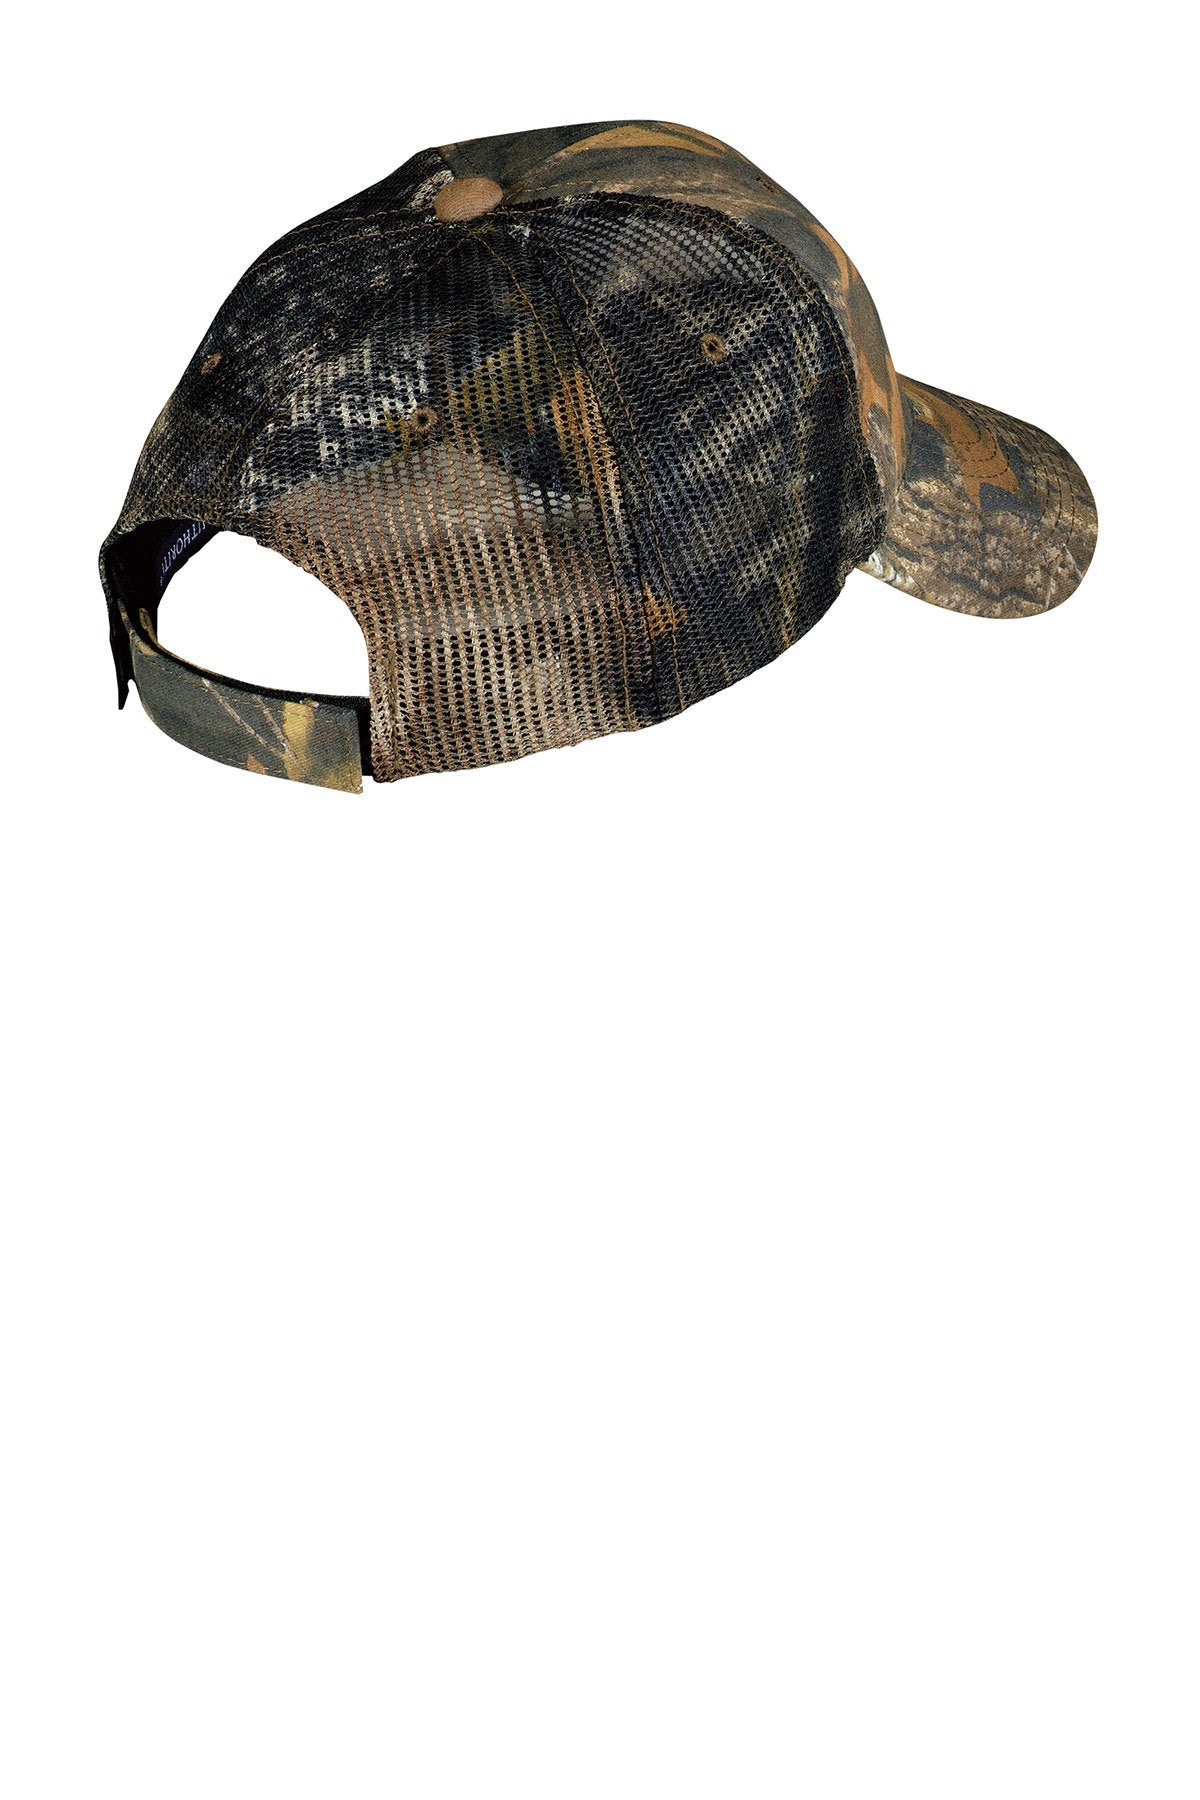 Port Authority Pro Camouflage Custom Series Caps with Mesh Back, Mossy Oak New Break-Up